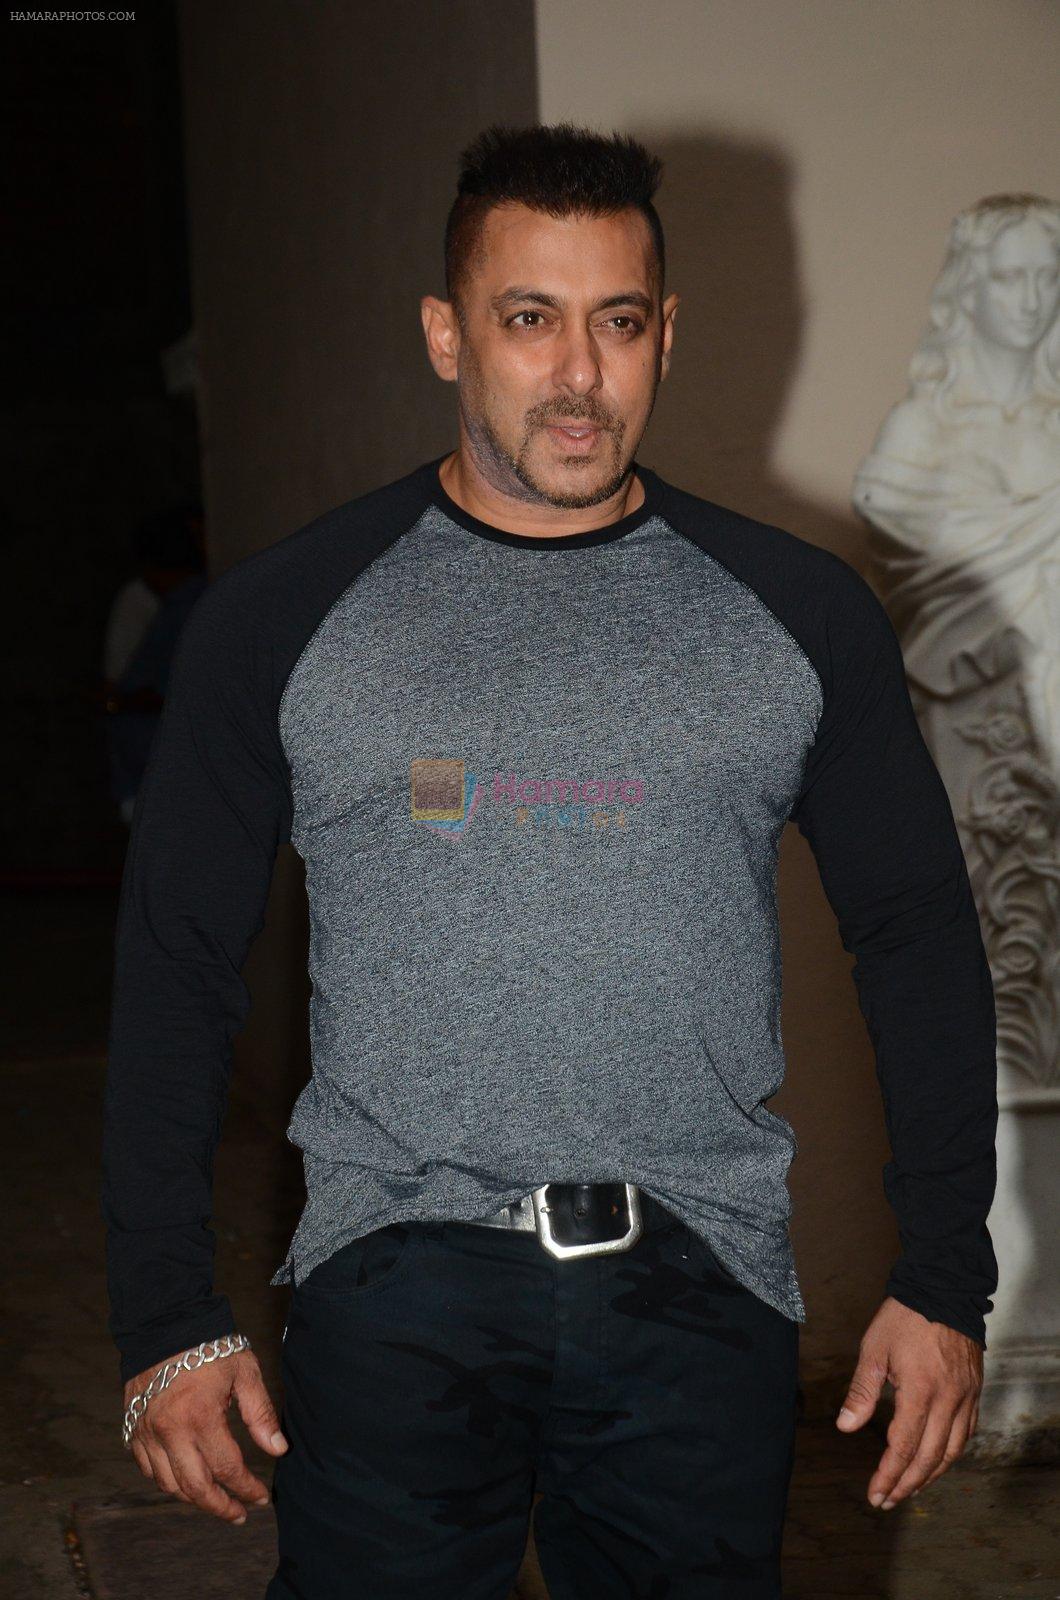 Bollywood actor Salman Khan during the press conference of film Sultan, in Mumbai, India on June 18, 2016